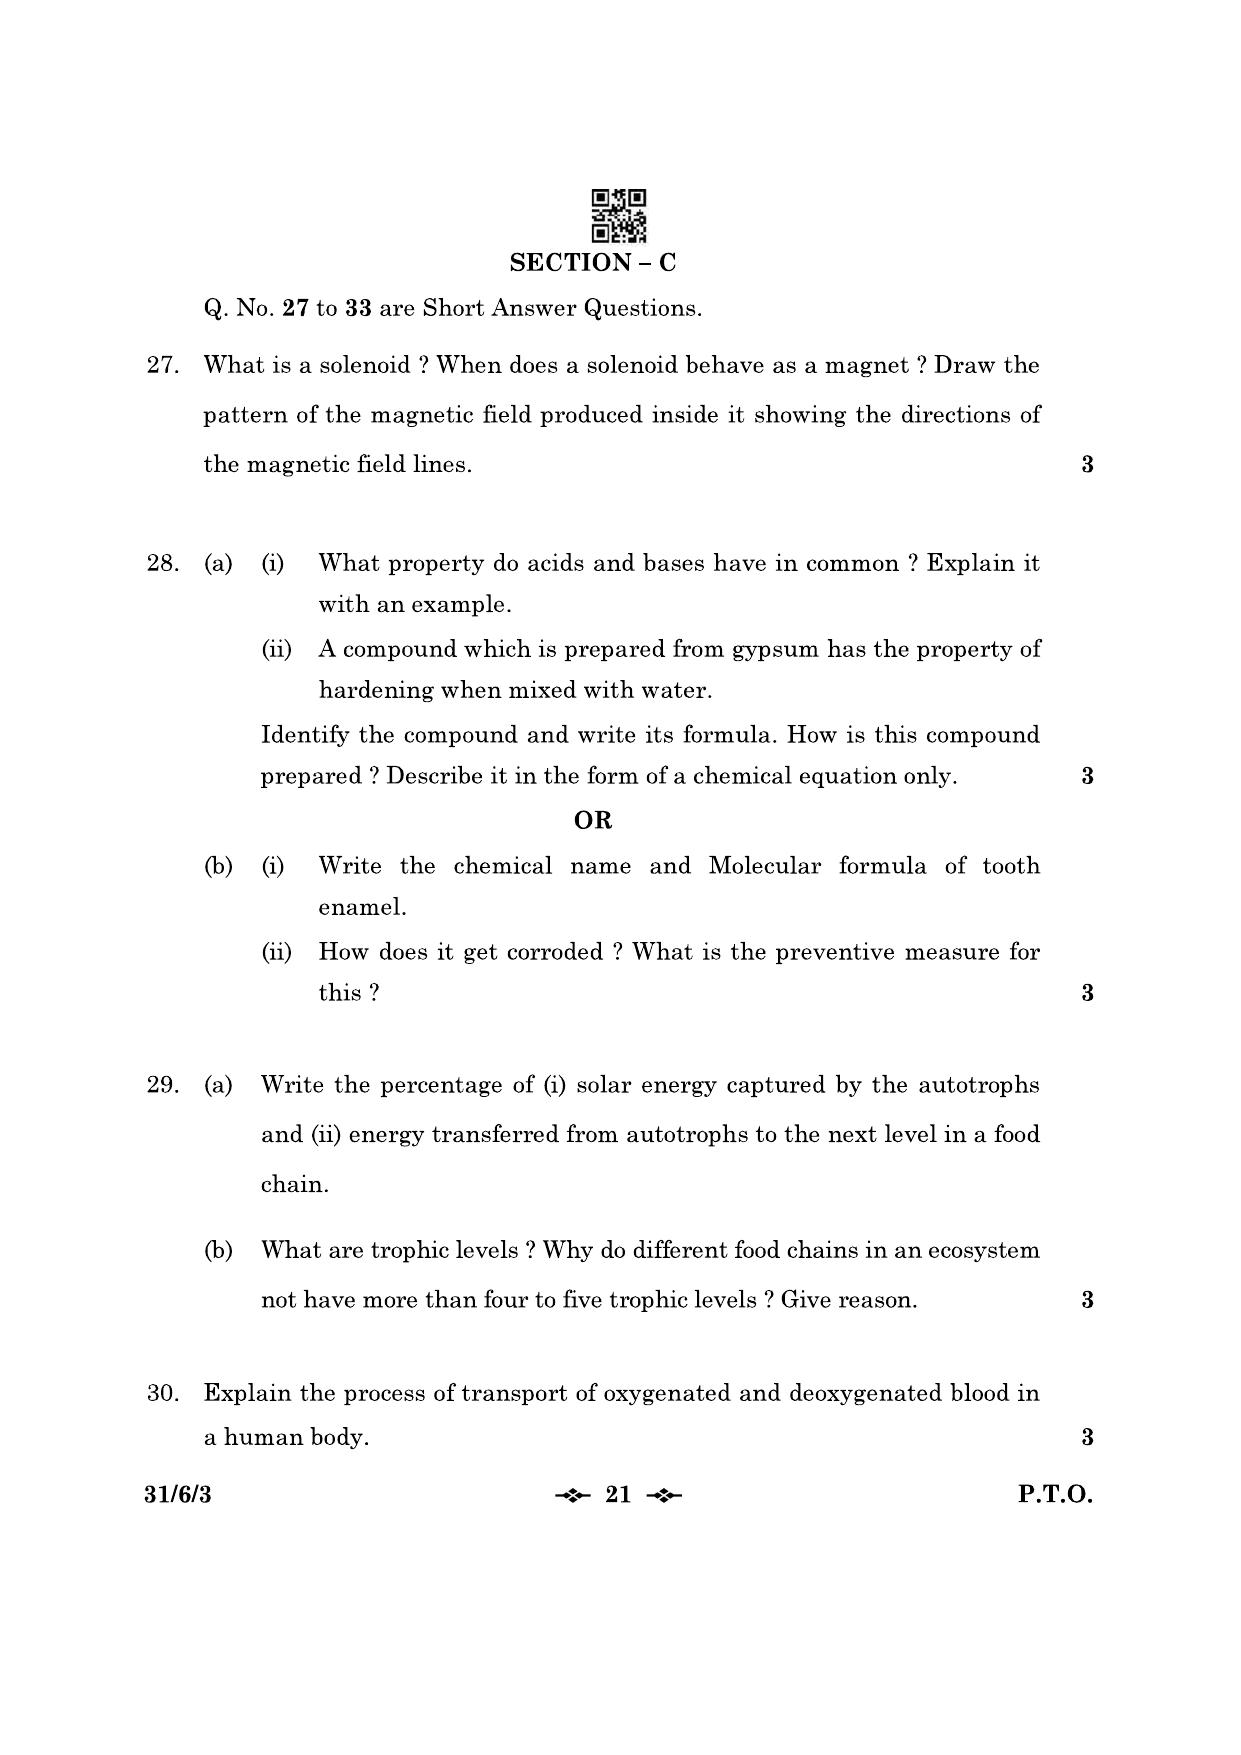 CBSE Class 10 31-6-3 Science 2023 Question Paper - Page 21